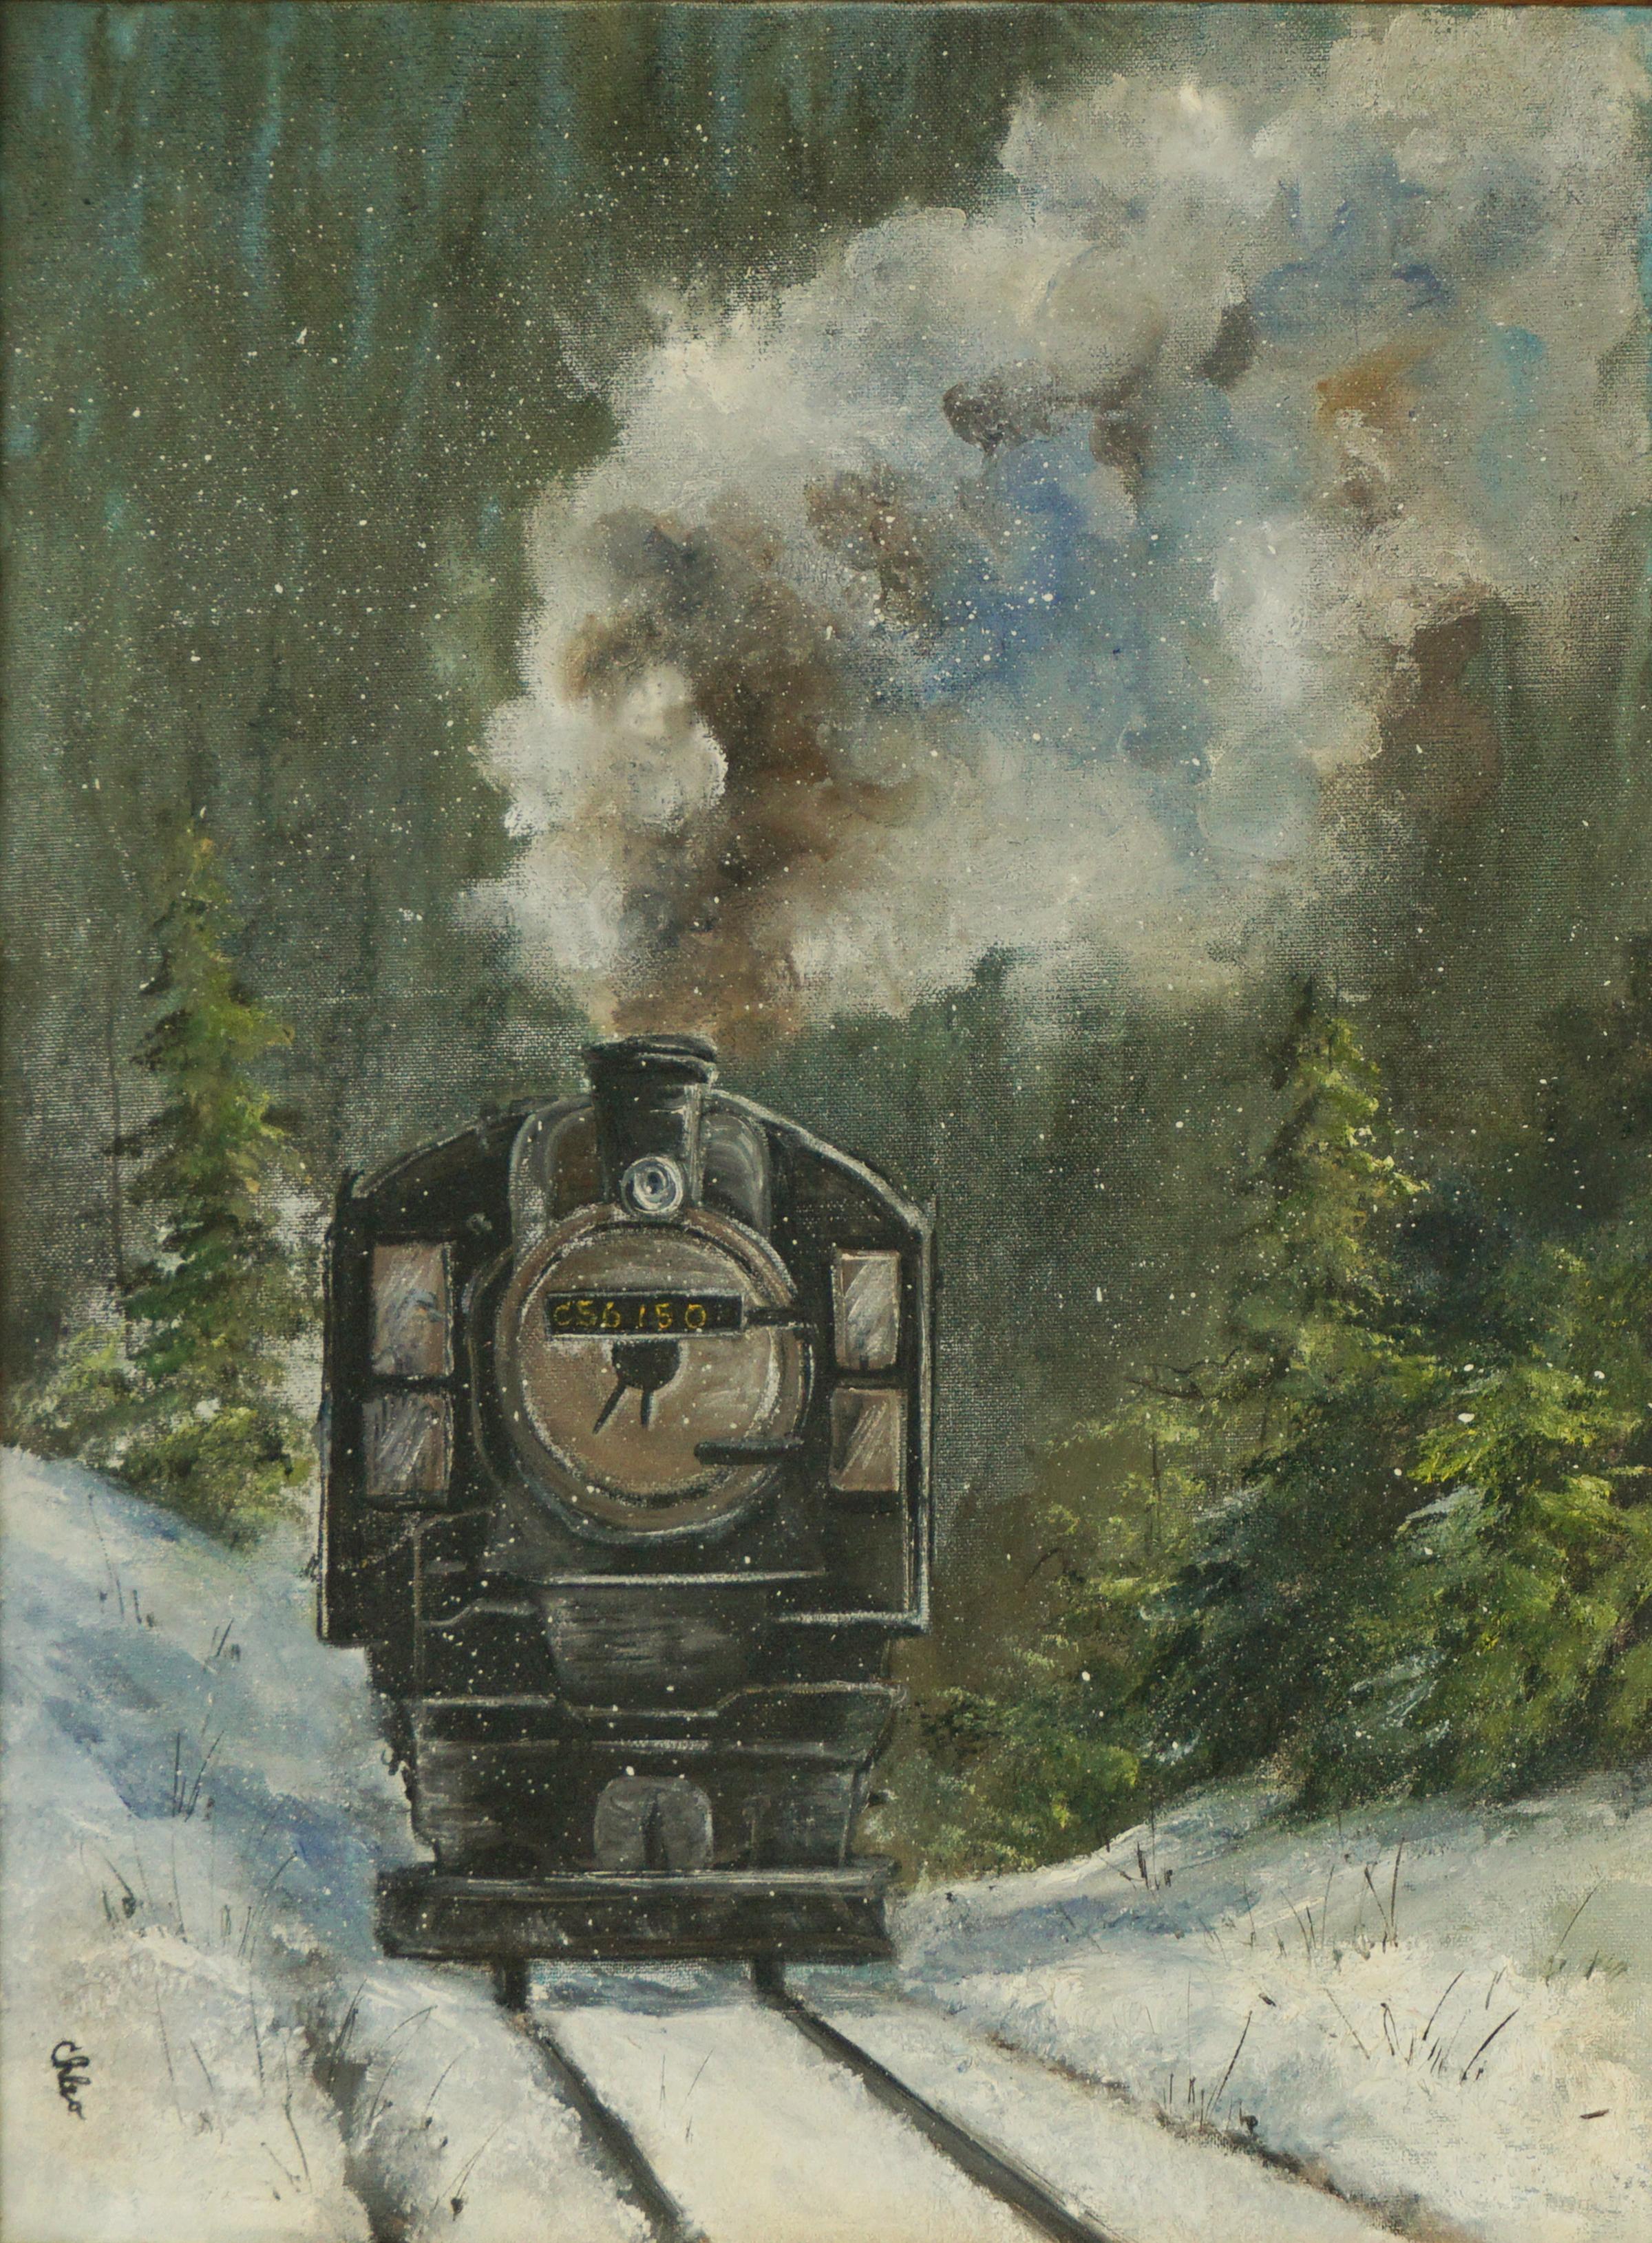 Steam Locomotive Train in Winter, Snowy Nocturnal Landscape - Painting by Unknown